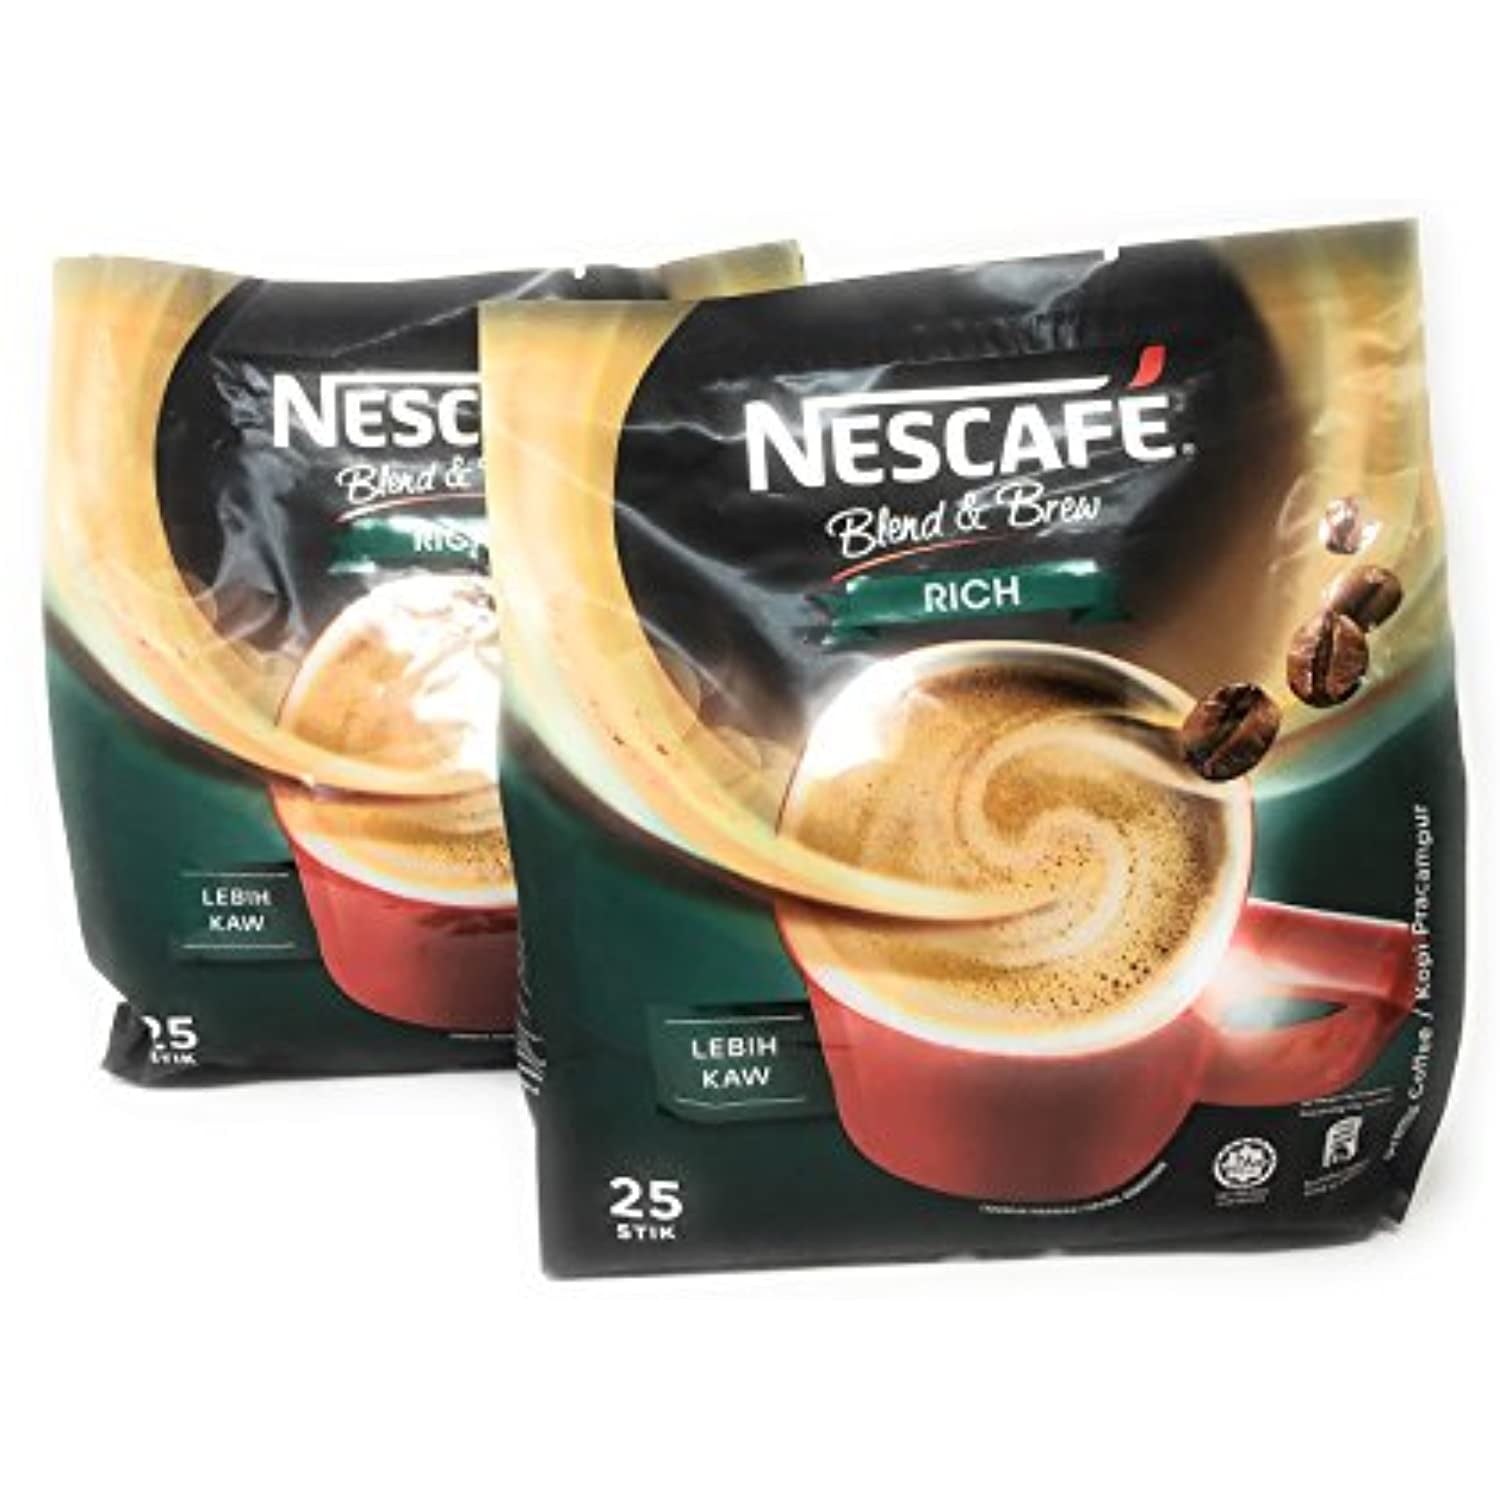 Nescafe 3 IN 1 - The perfect mixture of coffee